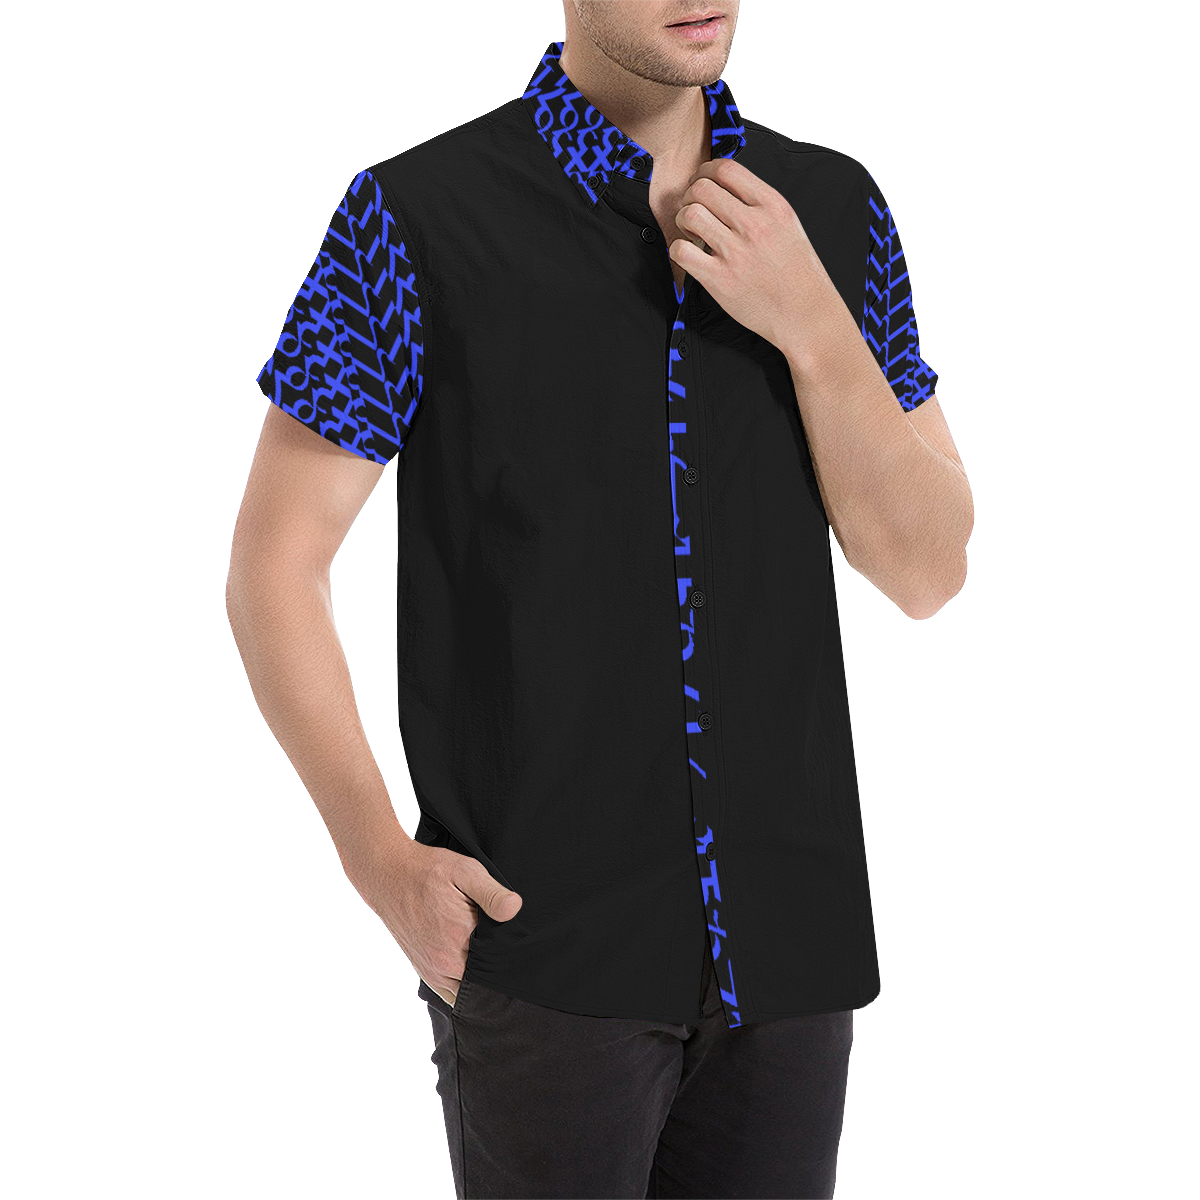 NUMBERS Collection 1234567 Black/"Reverse" Blueberry Men's All Over Print Short Sleeve Shirt (Model T53)